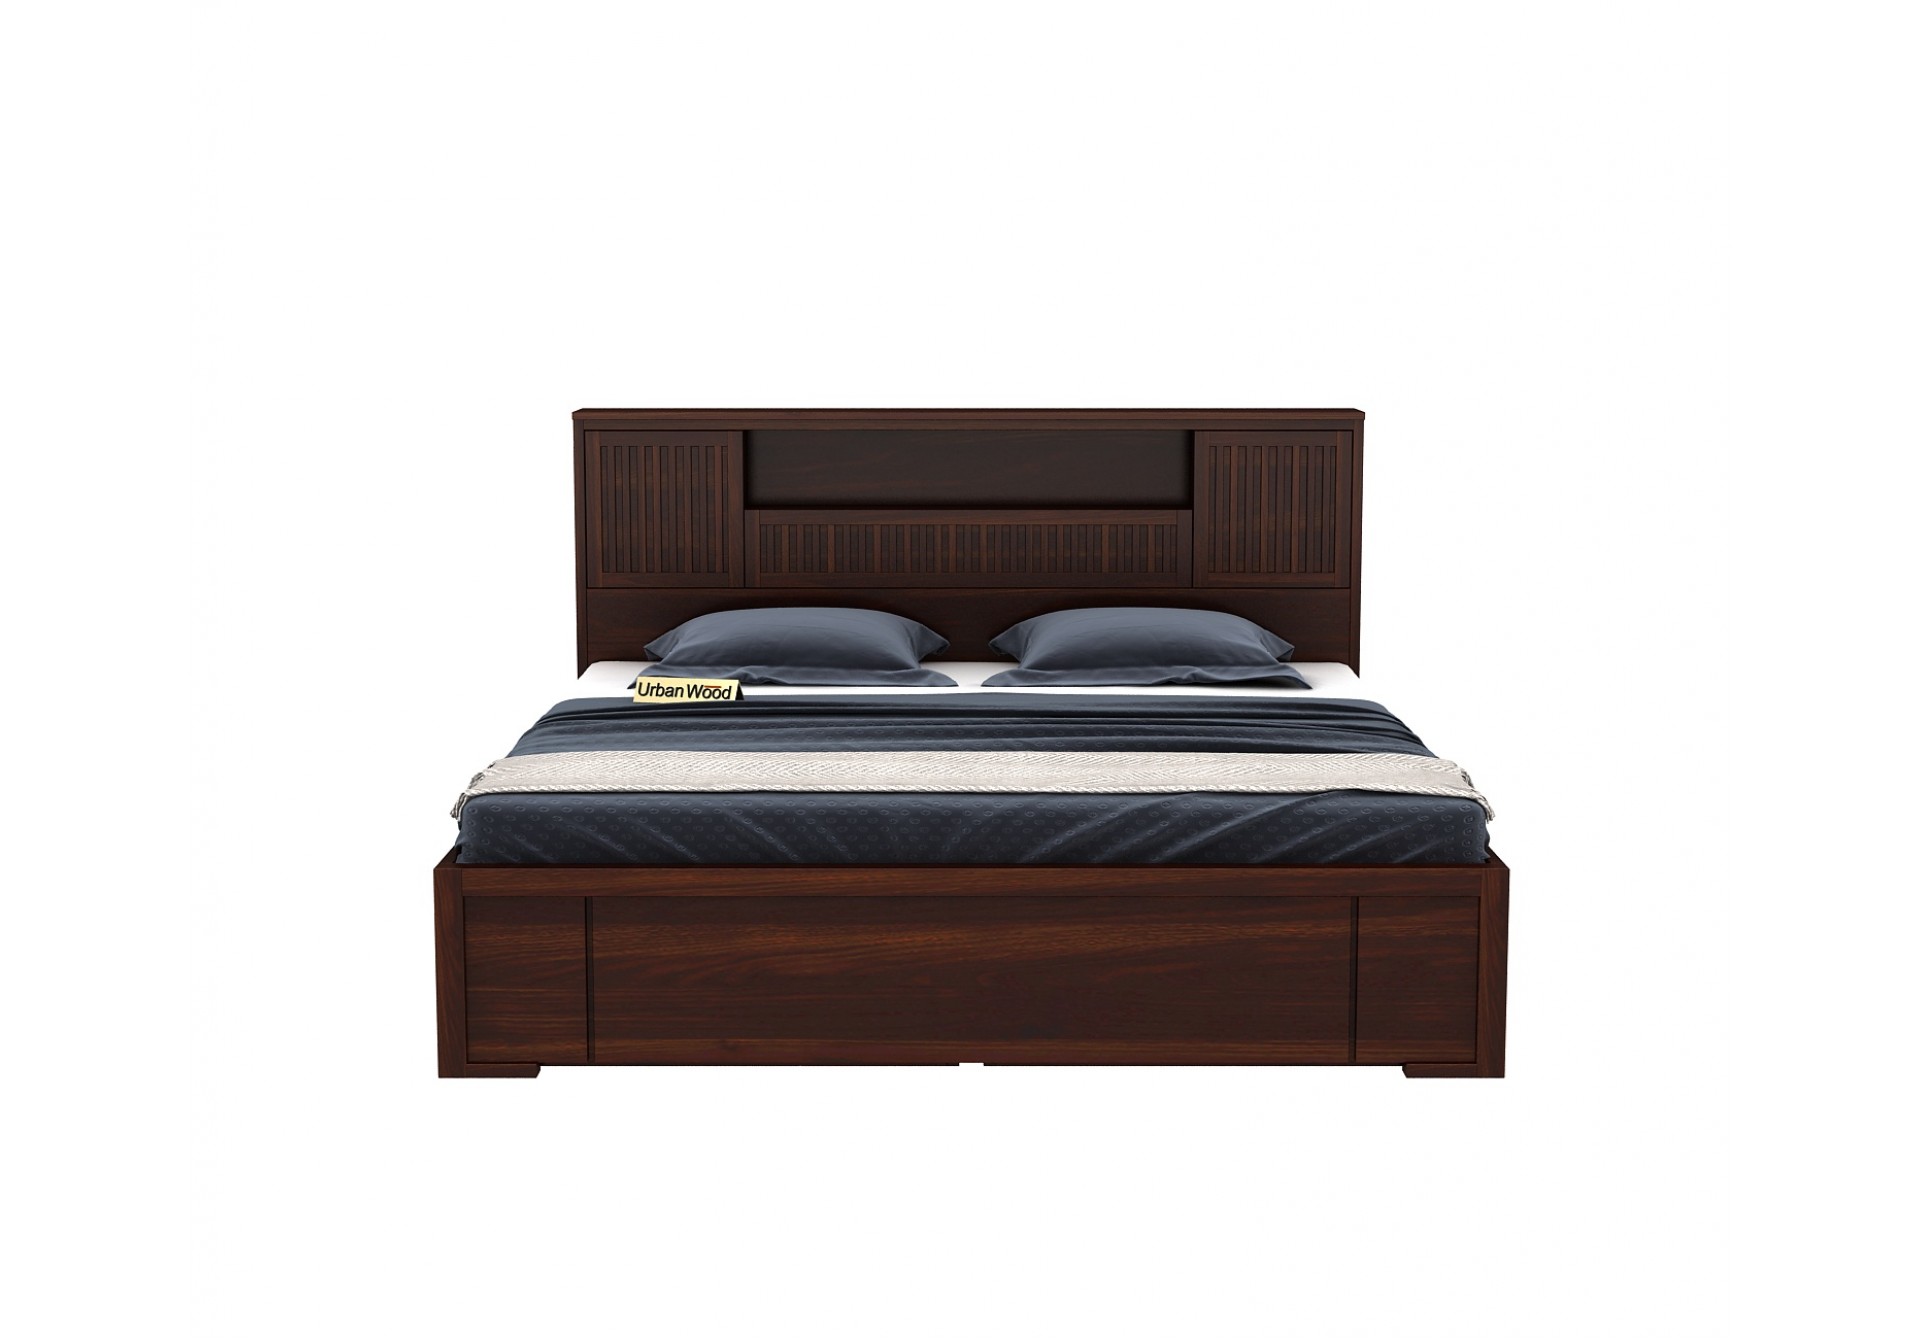 Stack Bed With Drawer Storage ( Queen Size, Walnut Finish )